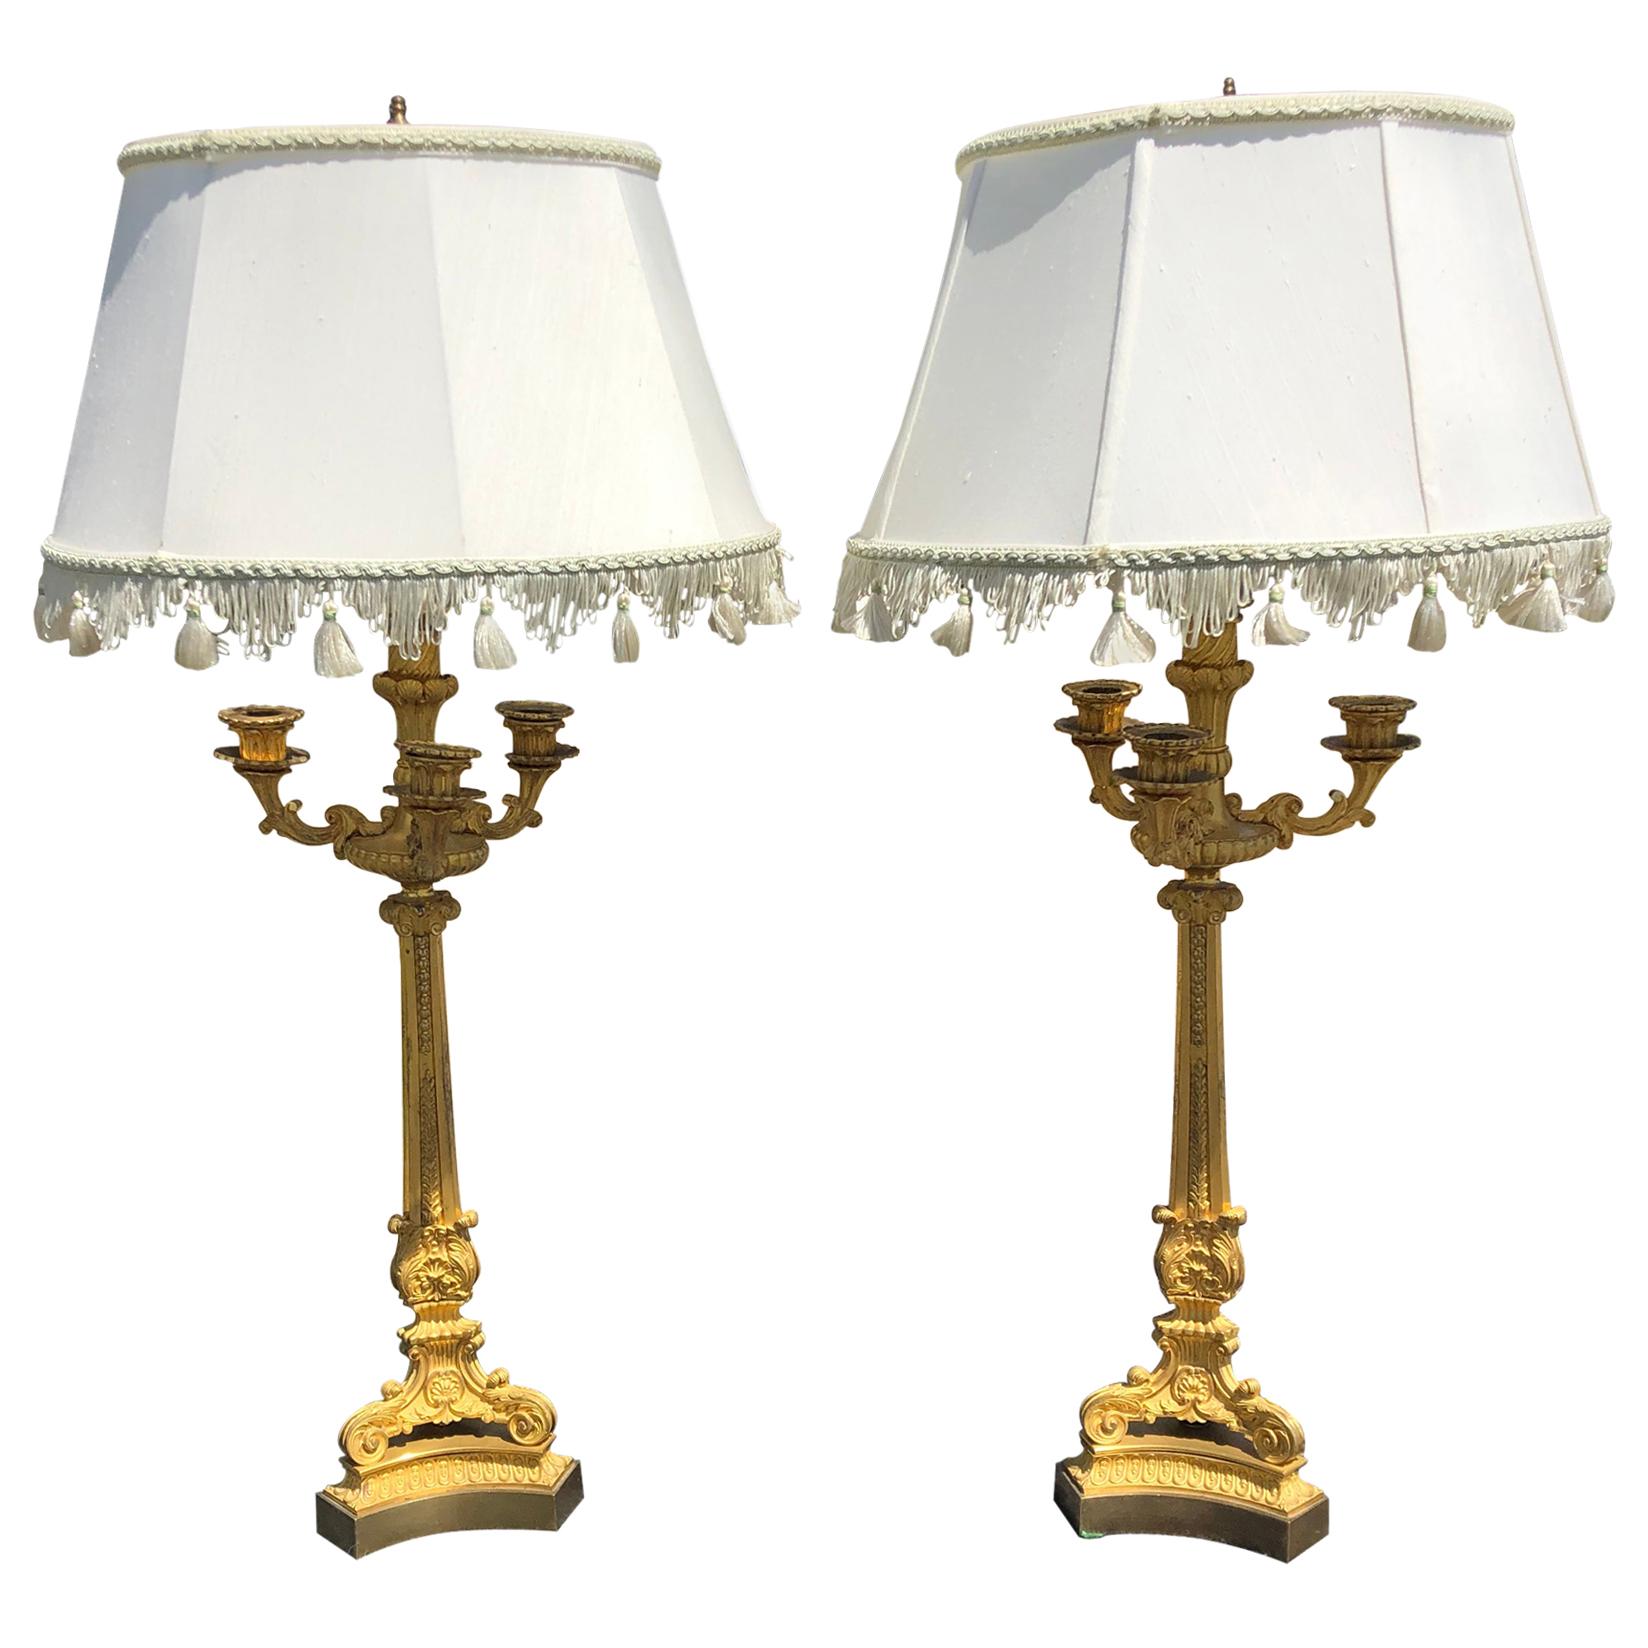 Pair of 19th Century French Ormolu Candelabra Lamps